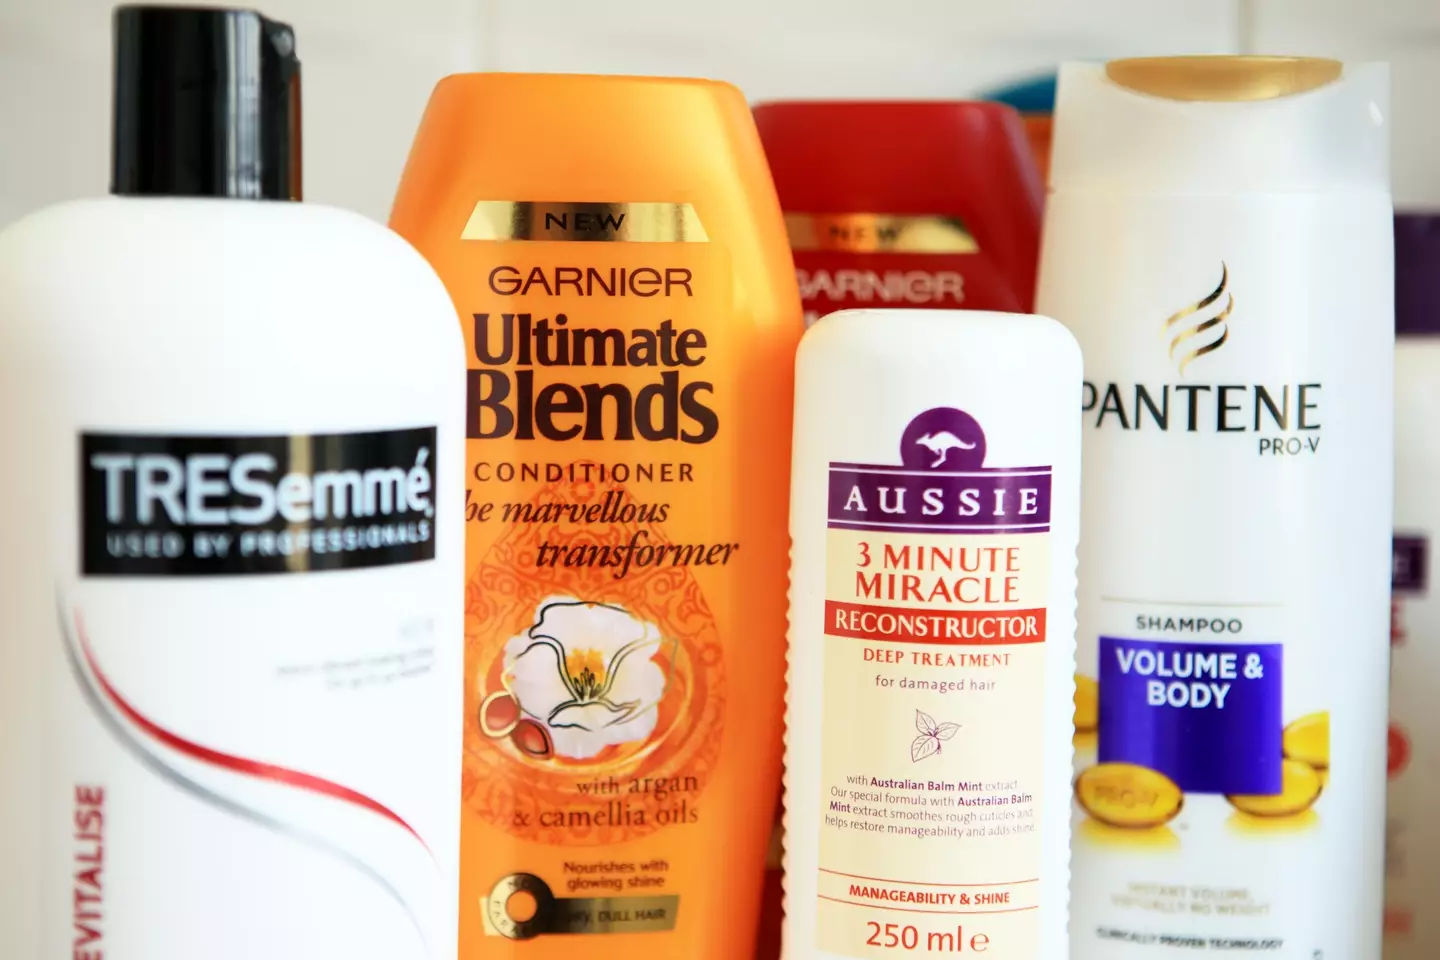 Nick claims shampoo and conditioners are simply a 'scam'.